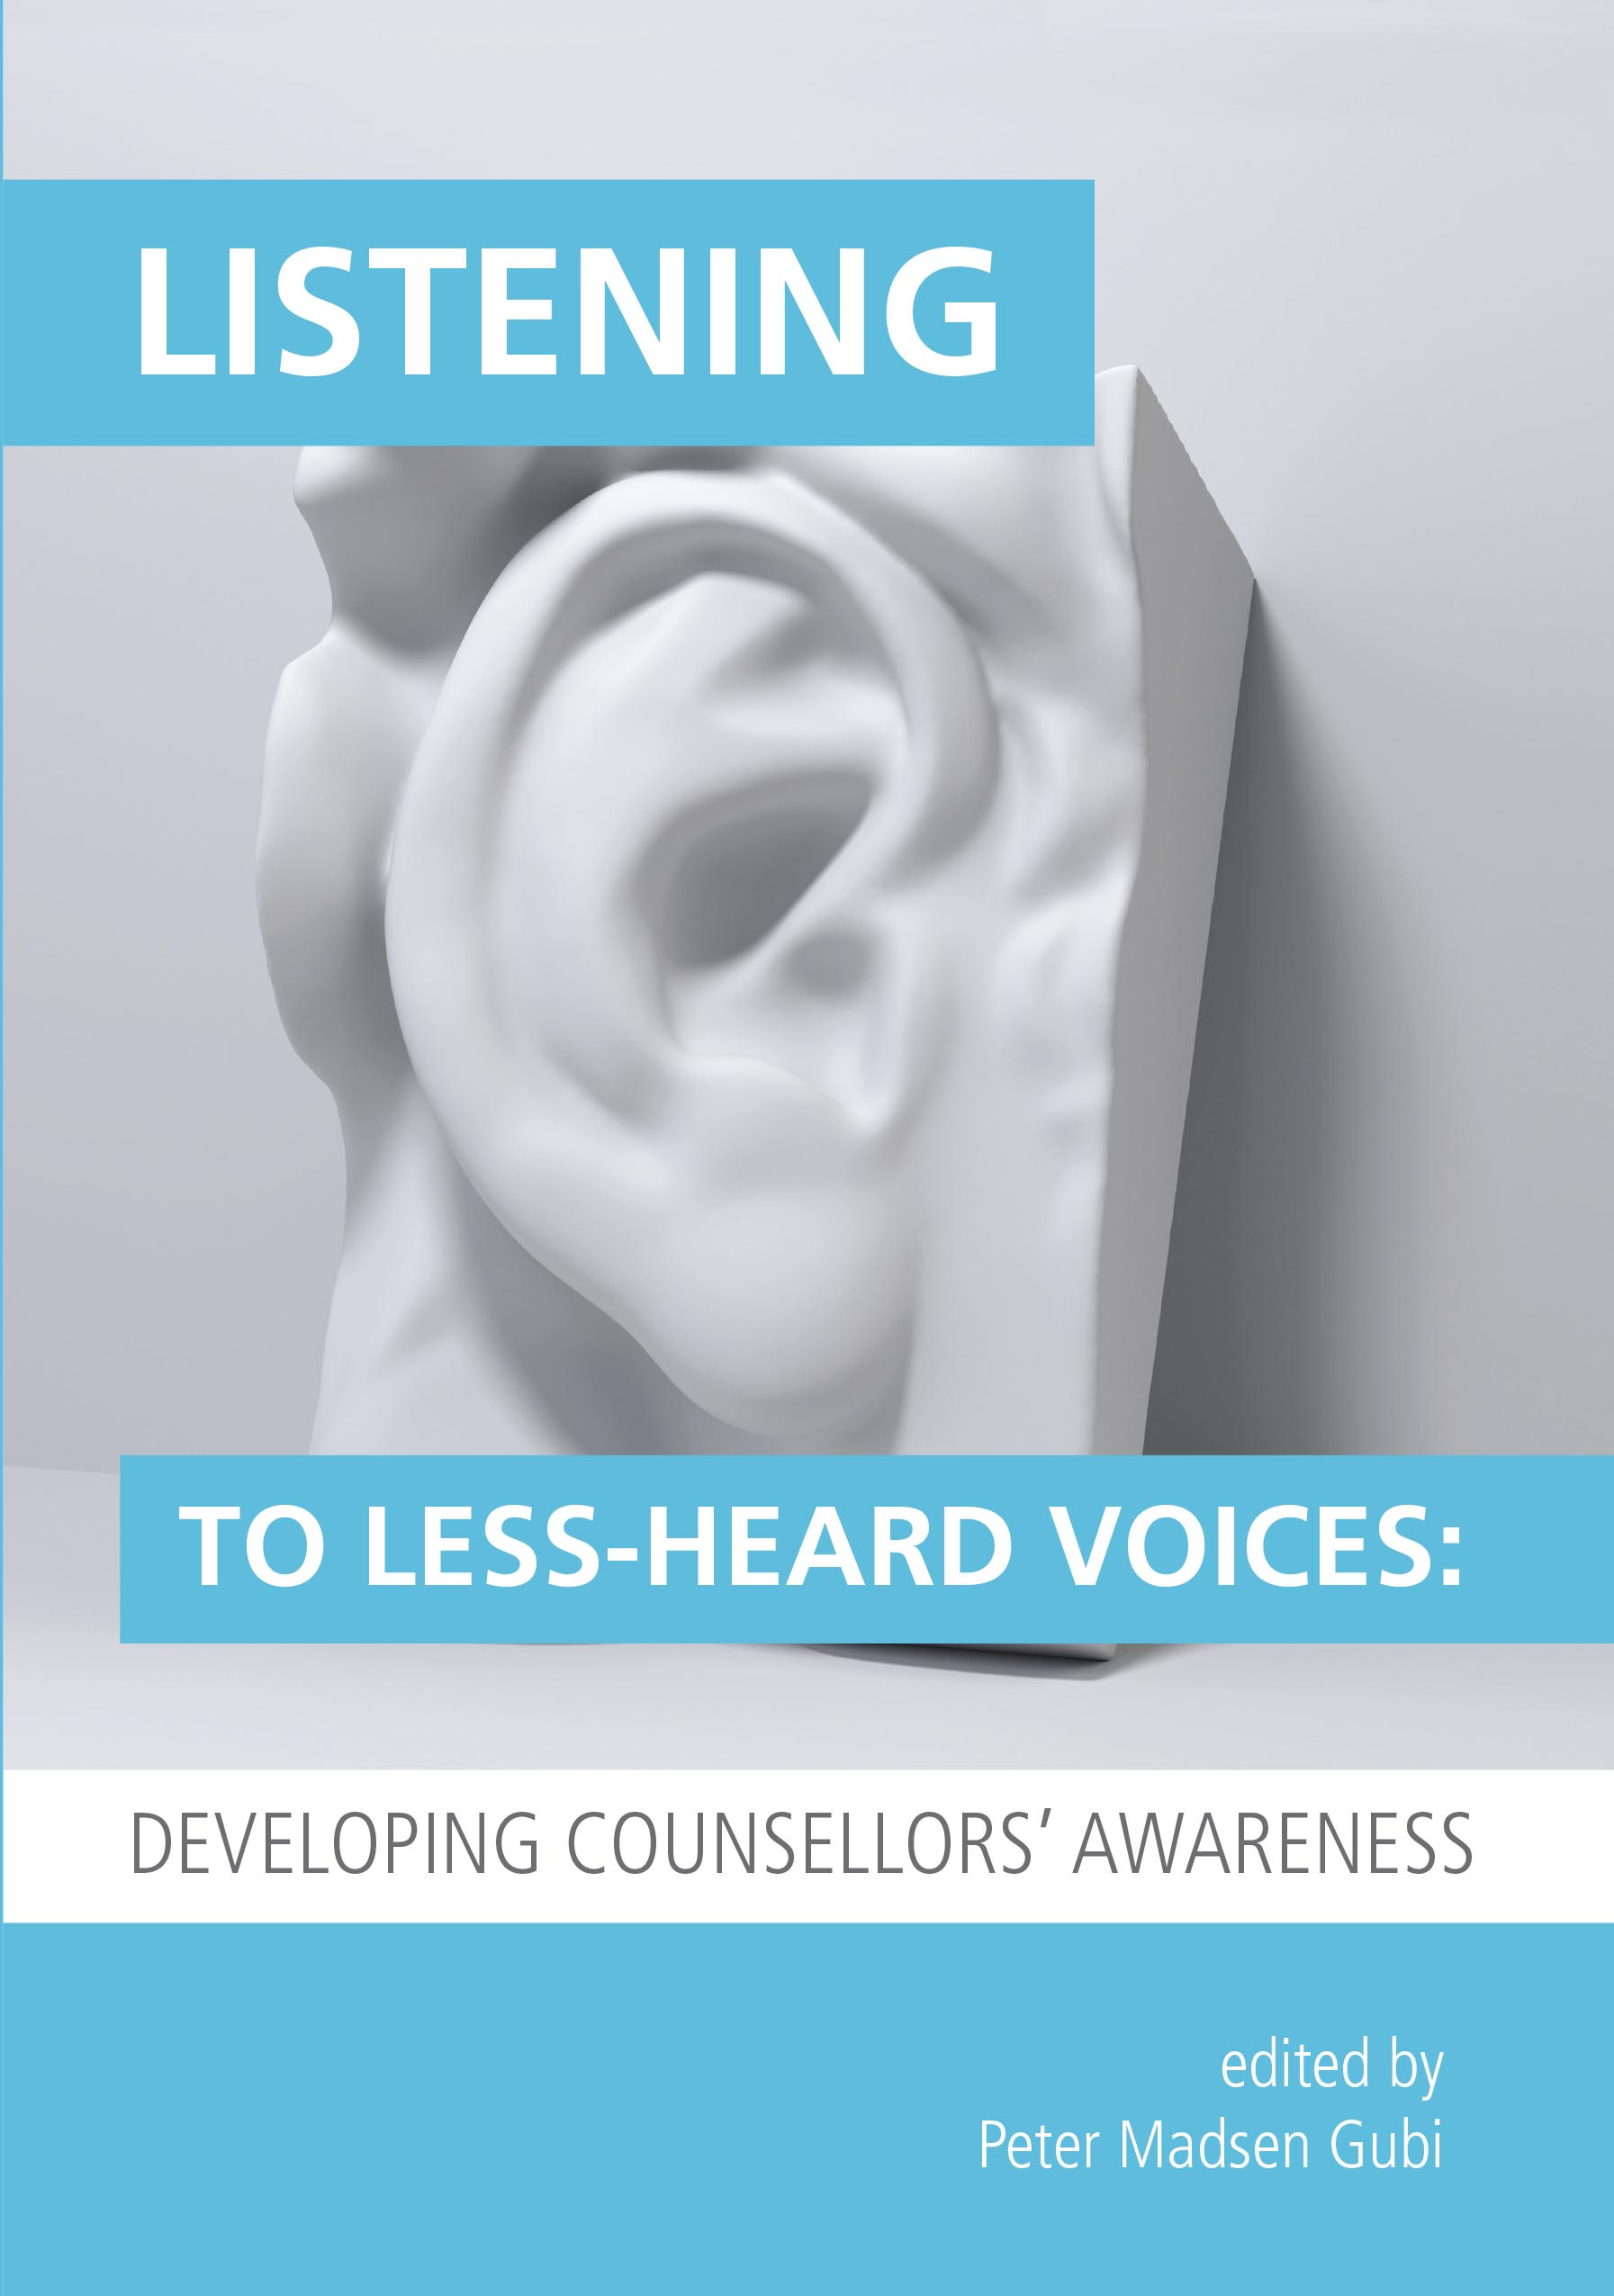 Listening to Less-Heard Voices: Developing Counsellors’ Awareness